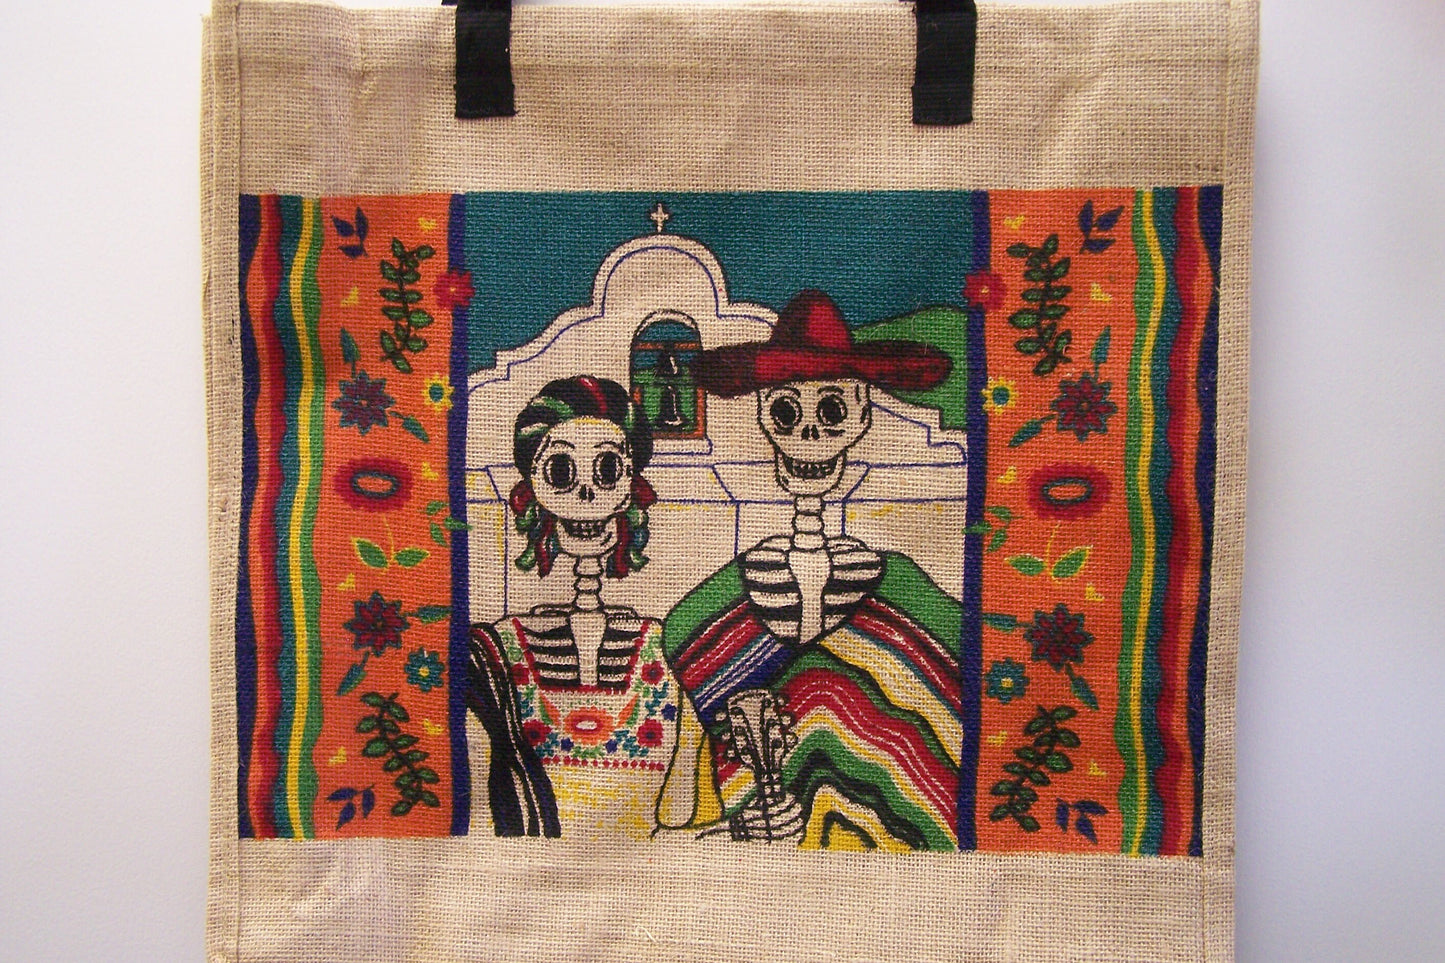 Day of the Dead "Mexican American Gothic" Skeletons Sturdy Jute Shopping Bag 18.5" x 18" x 5"